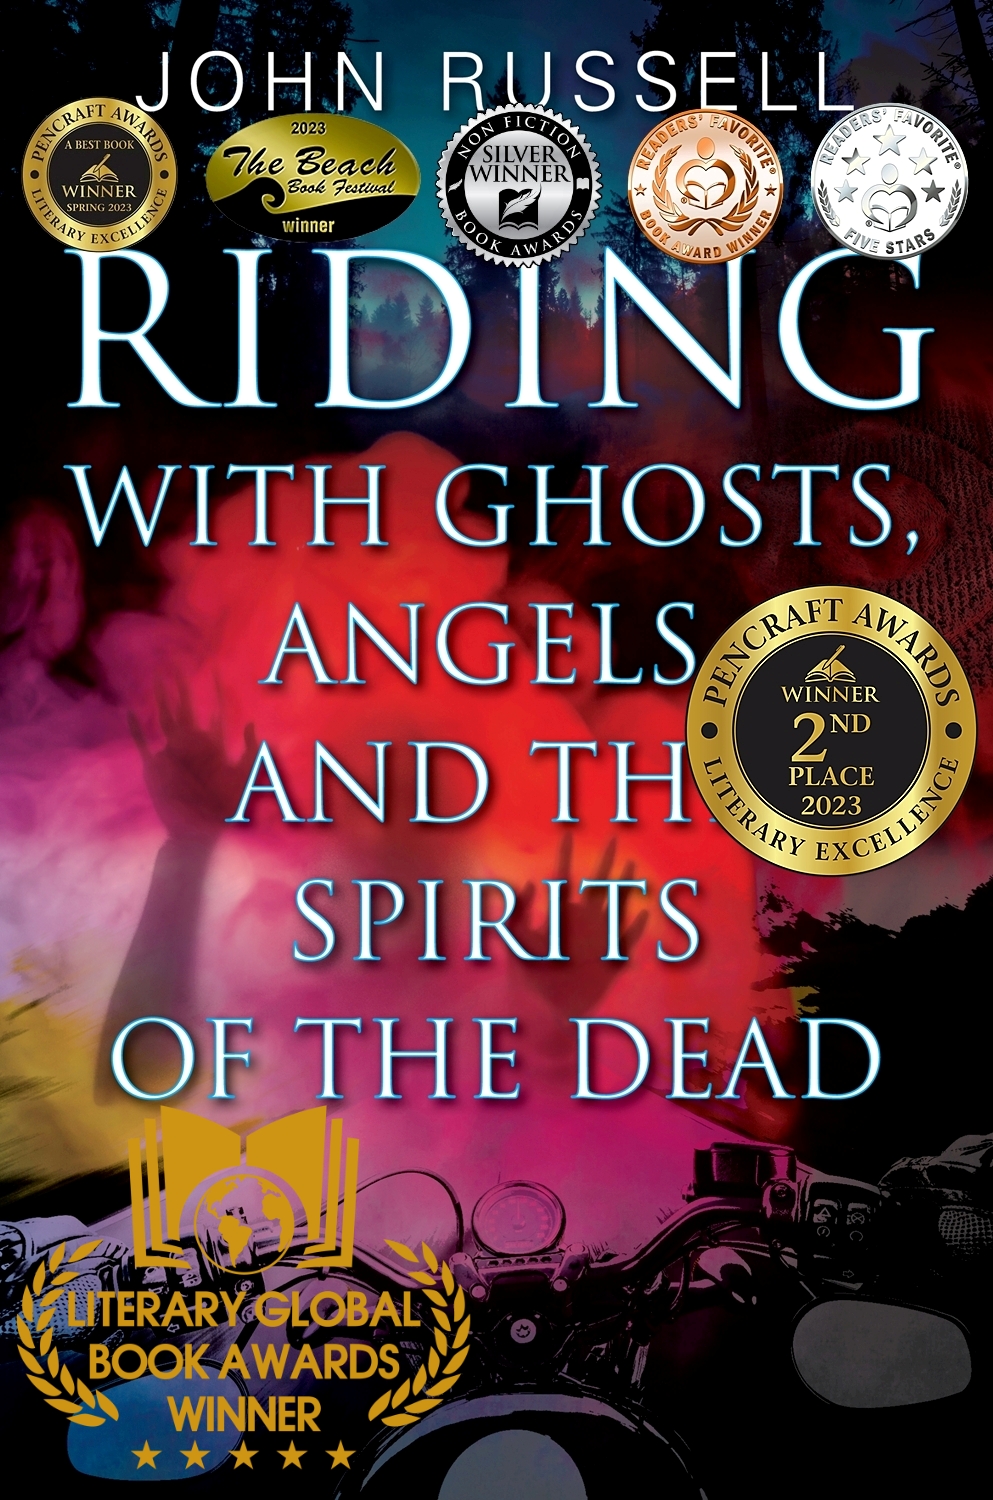 Riding with Ghosts, Angels, and the Spirits of the Dead by John Russell